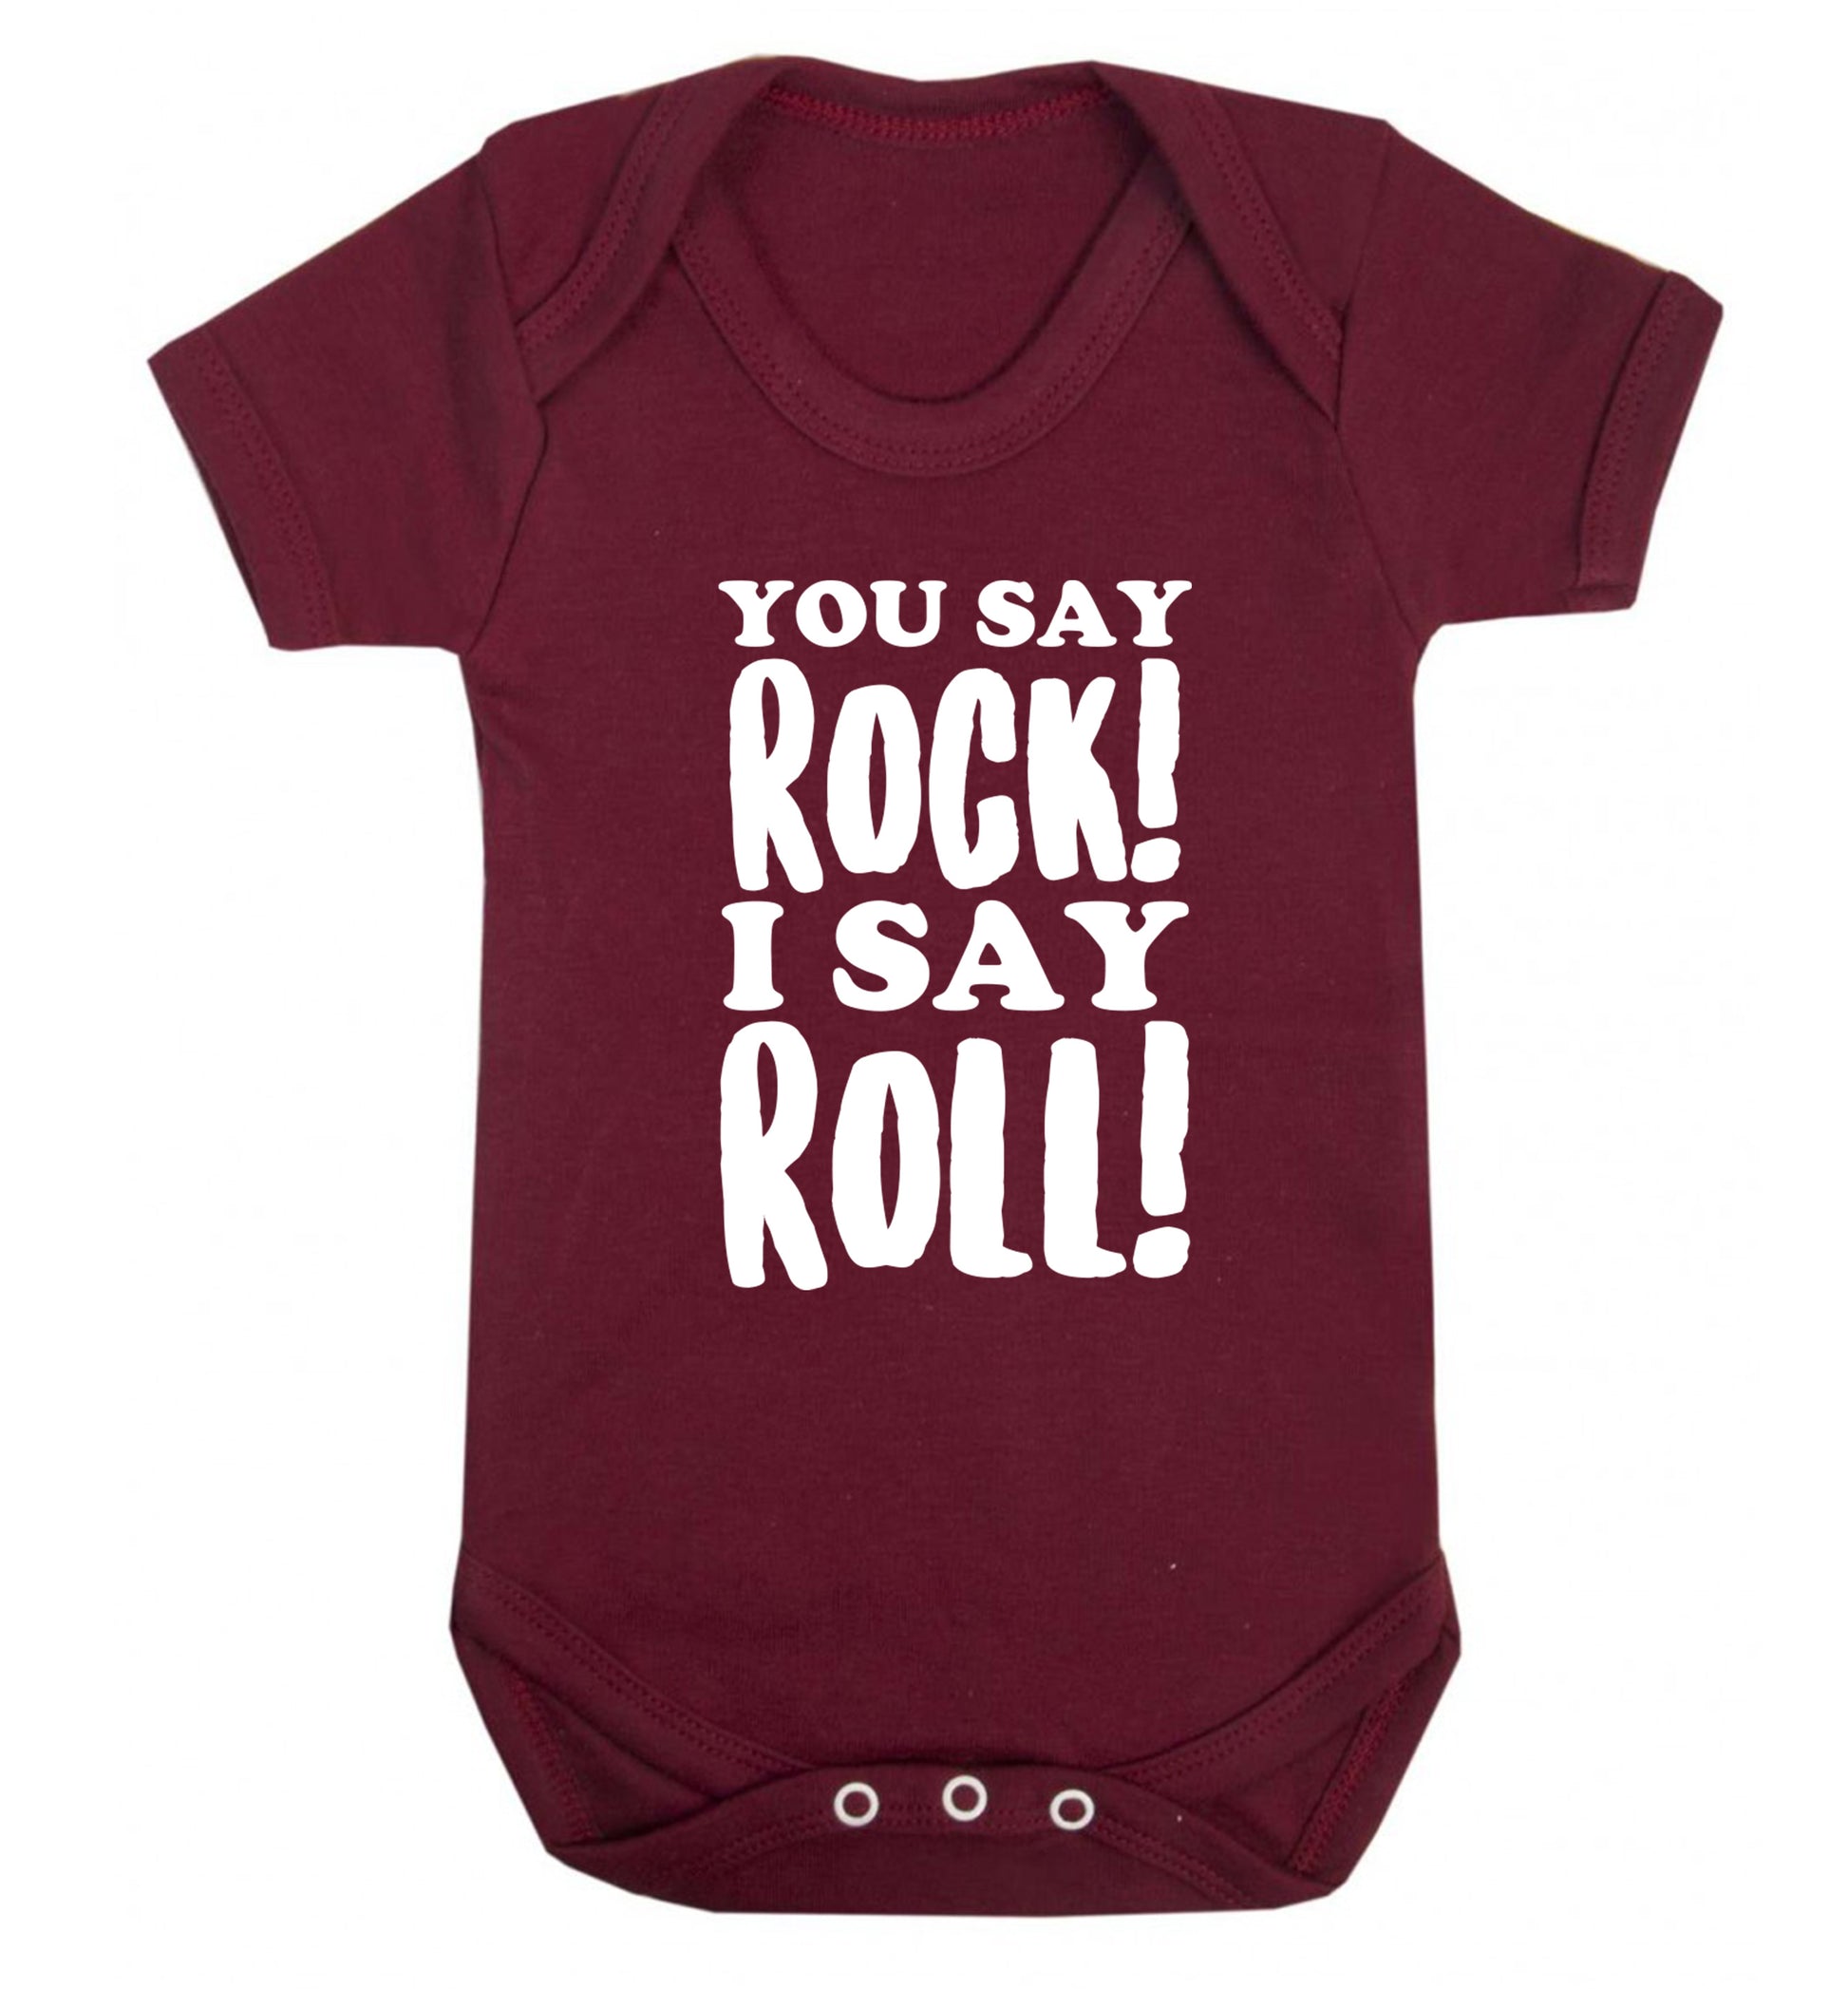 You say rock I say roll! Baby Vest maroon 18-24 months